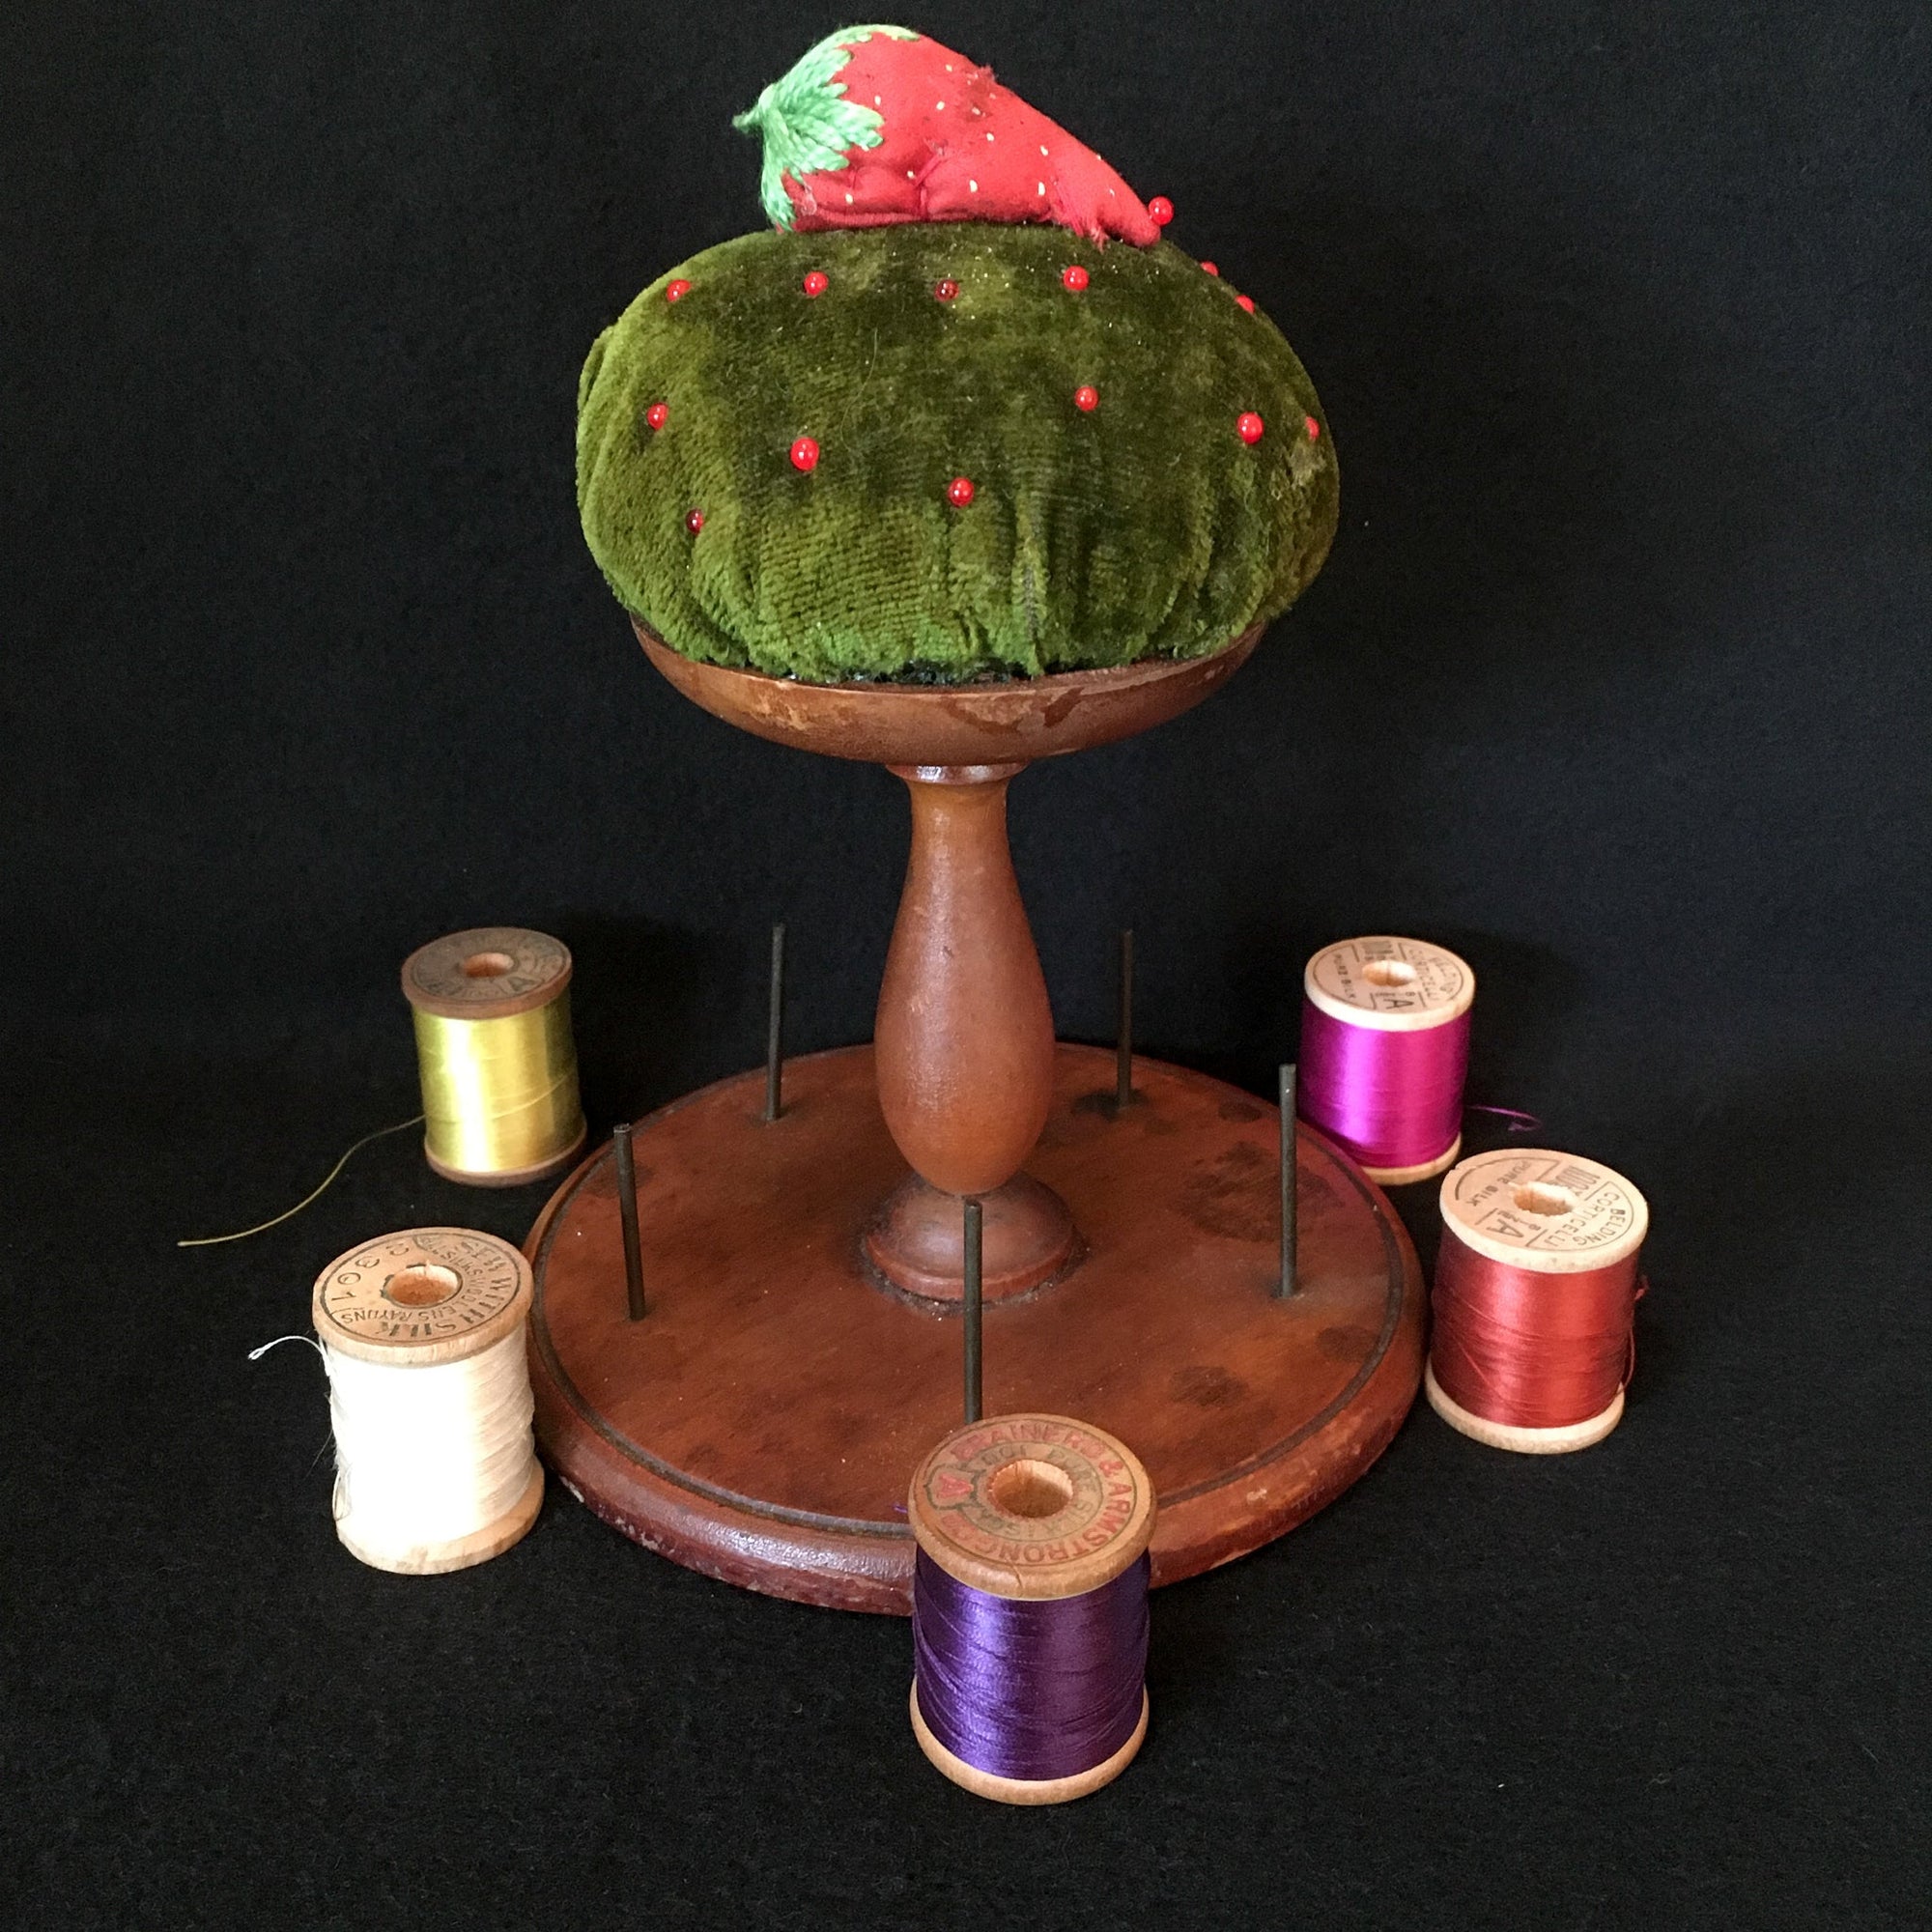 Wooden Spool Holder with Pin Cushion and Strawberry Emery